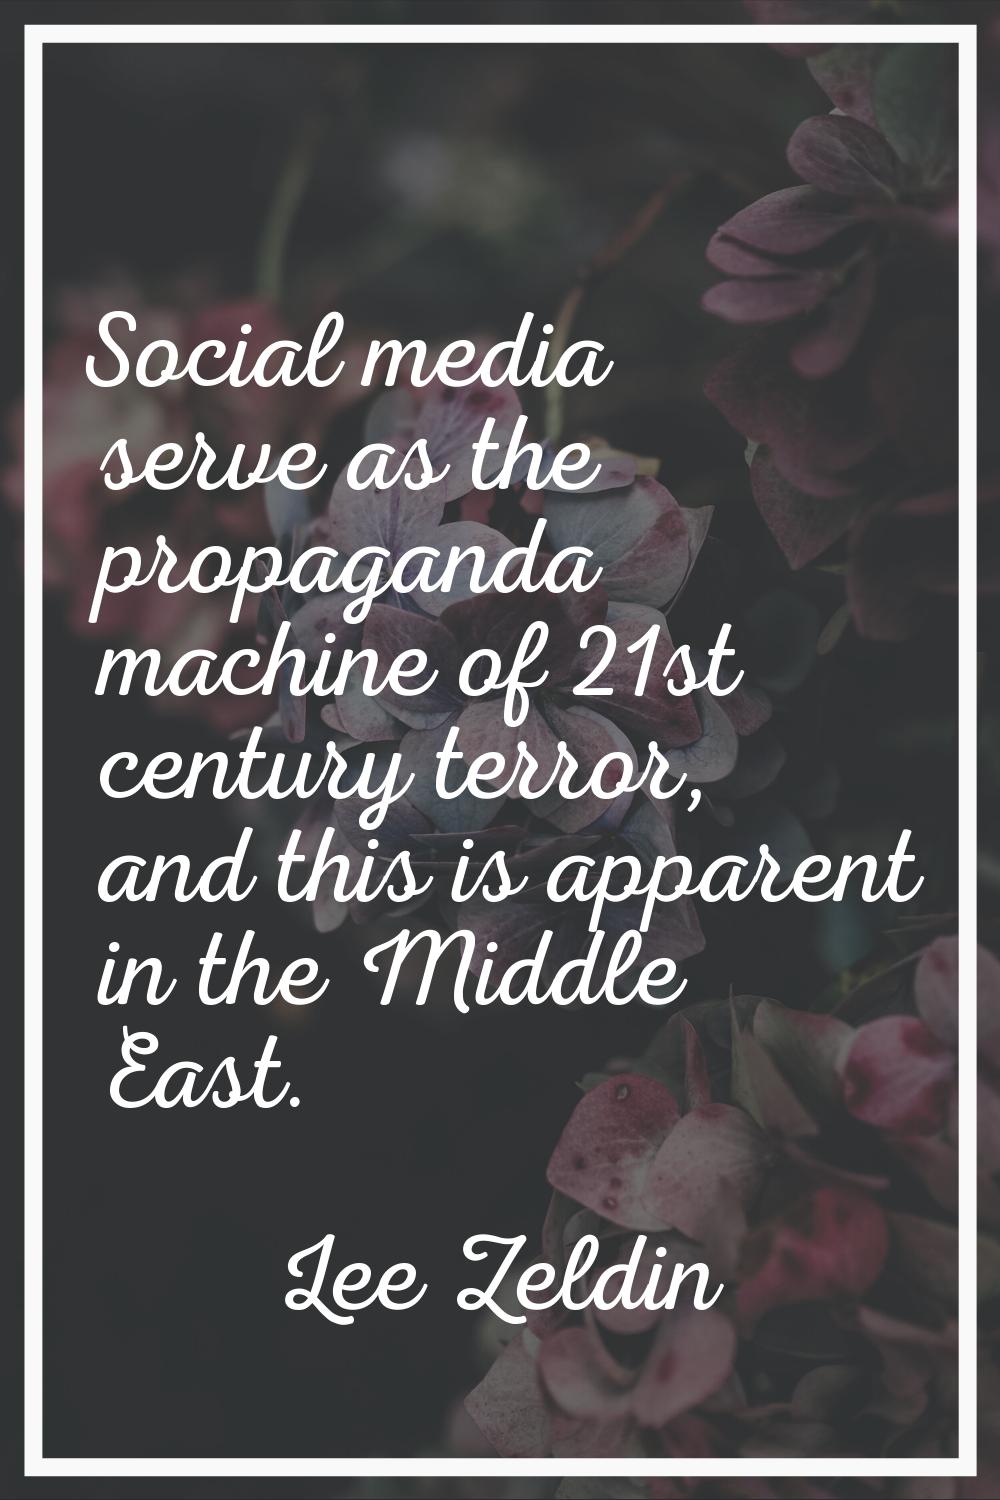 Social media serve as the propaganda machine of 21st century terror, and this is apparent in the Mi